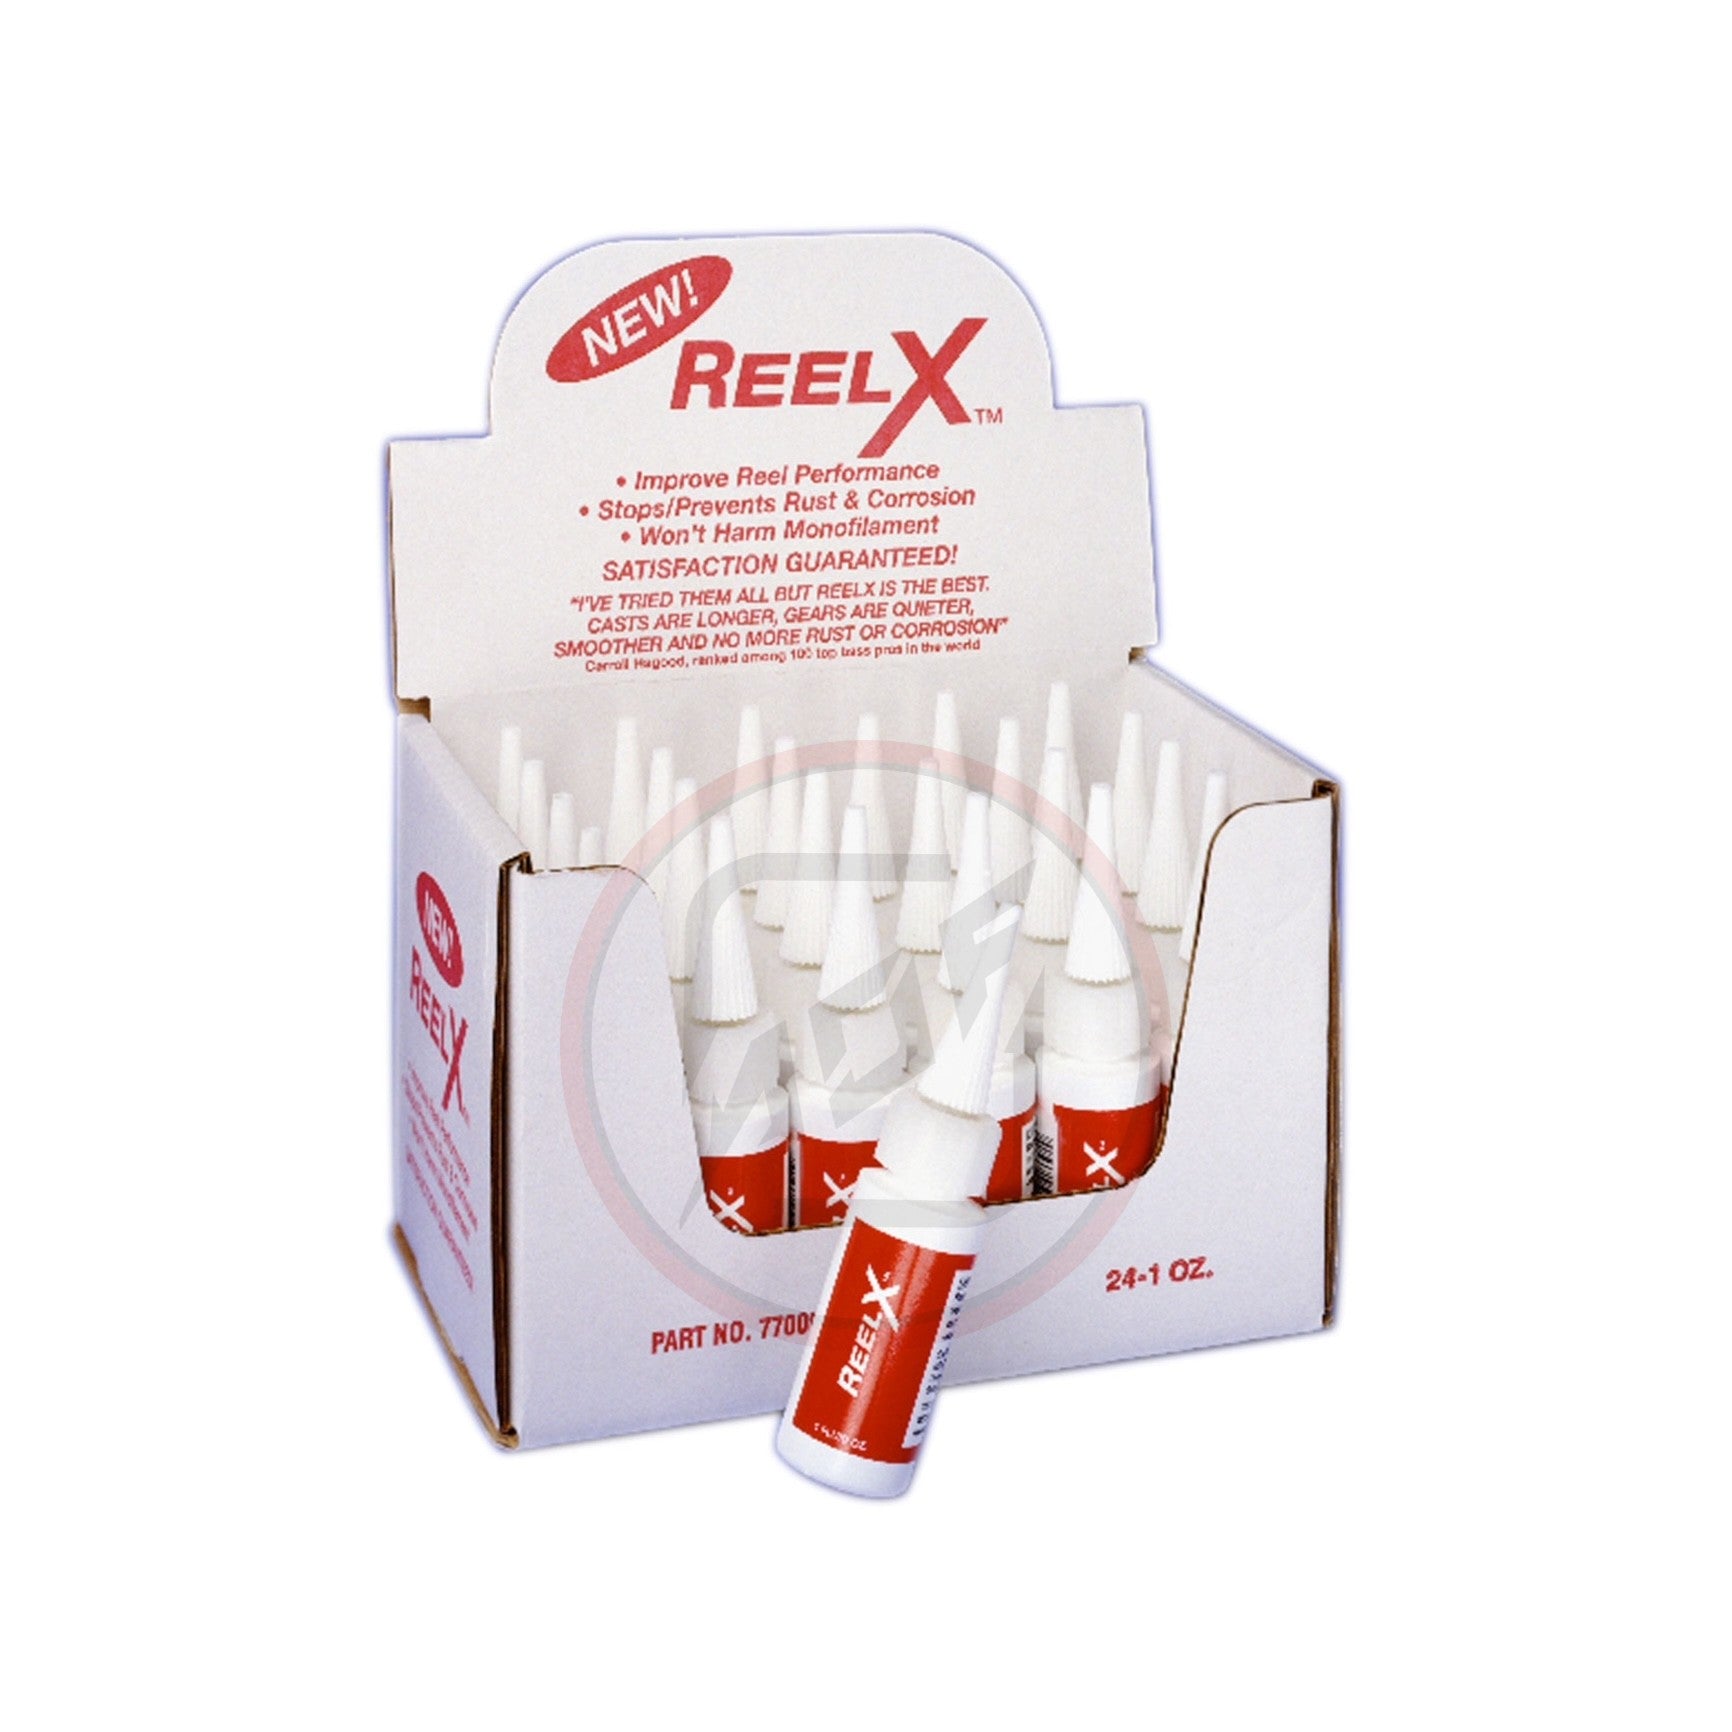 Reel X General lubrication Oil – Anglers Outfitter - AOF